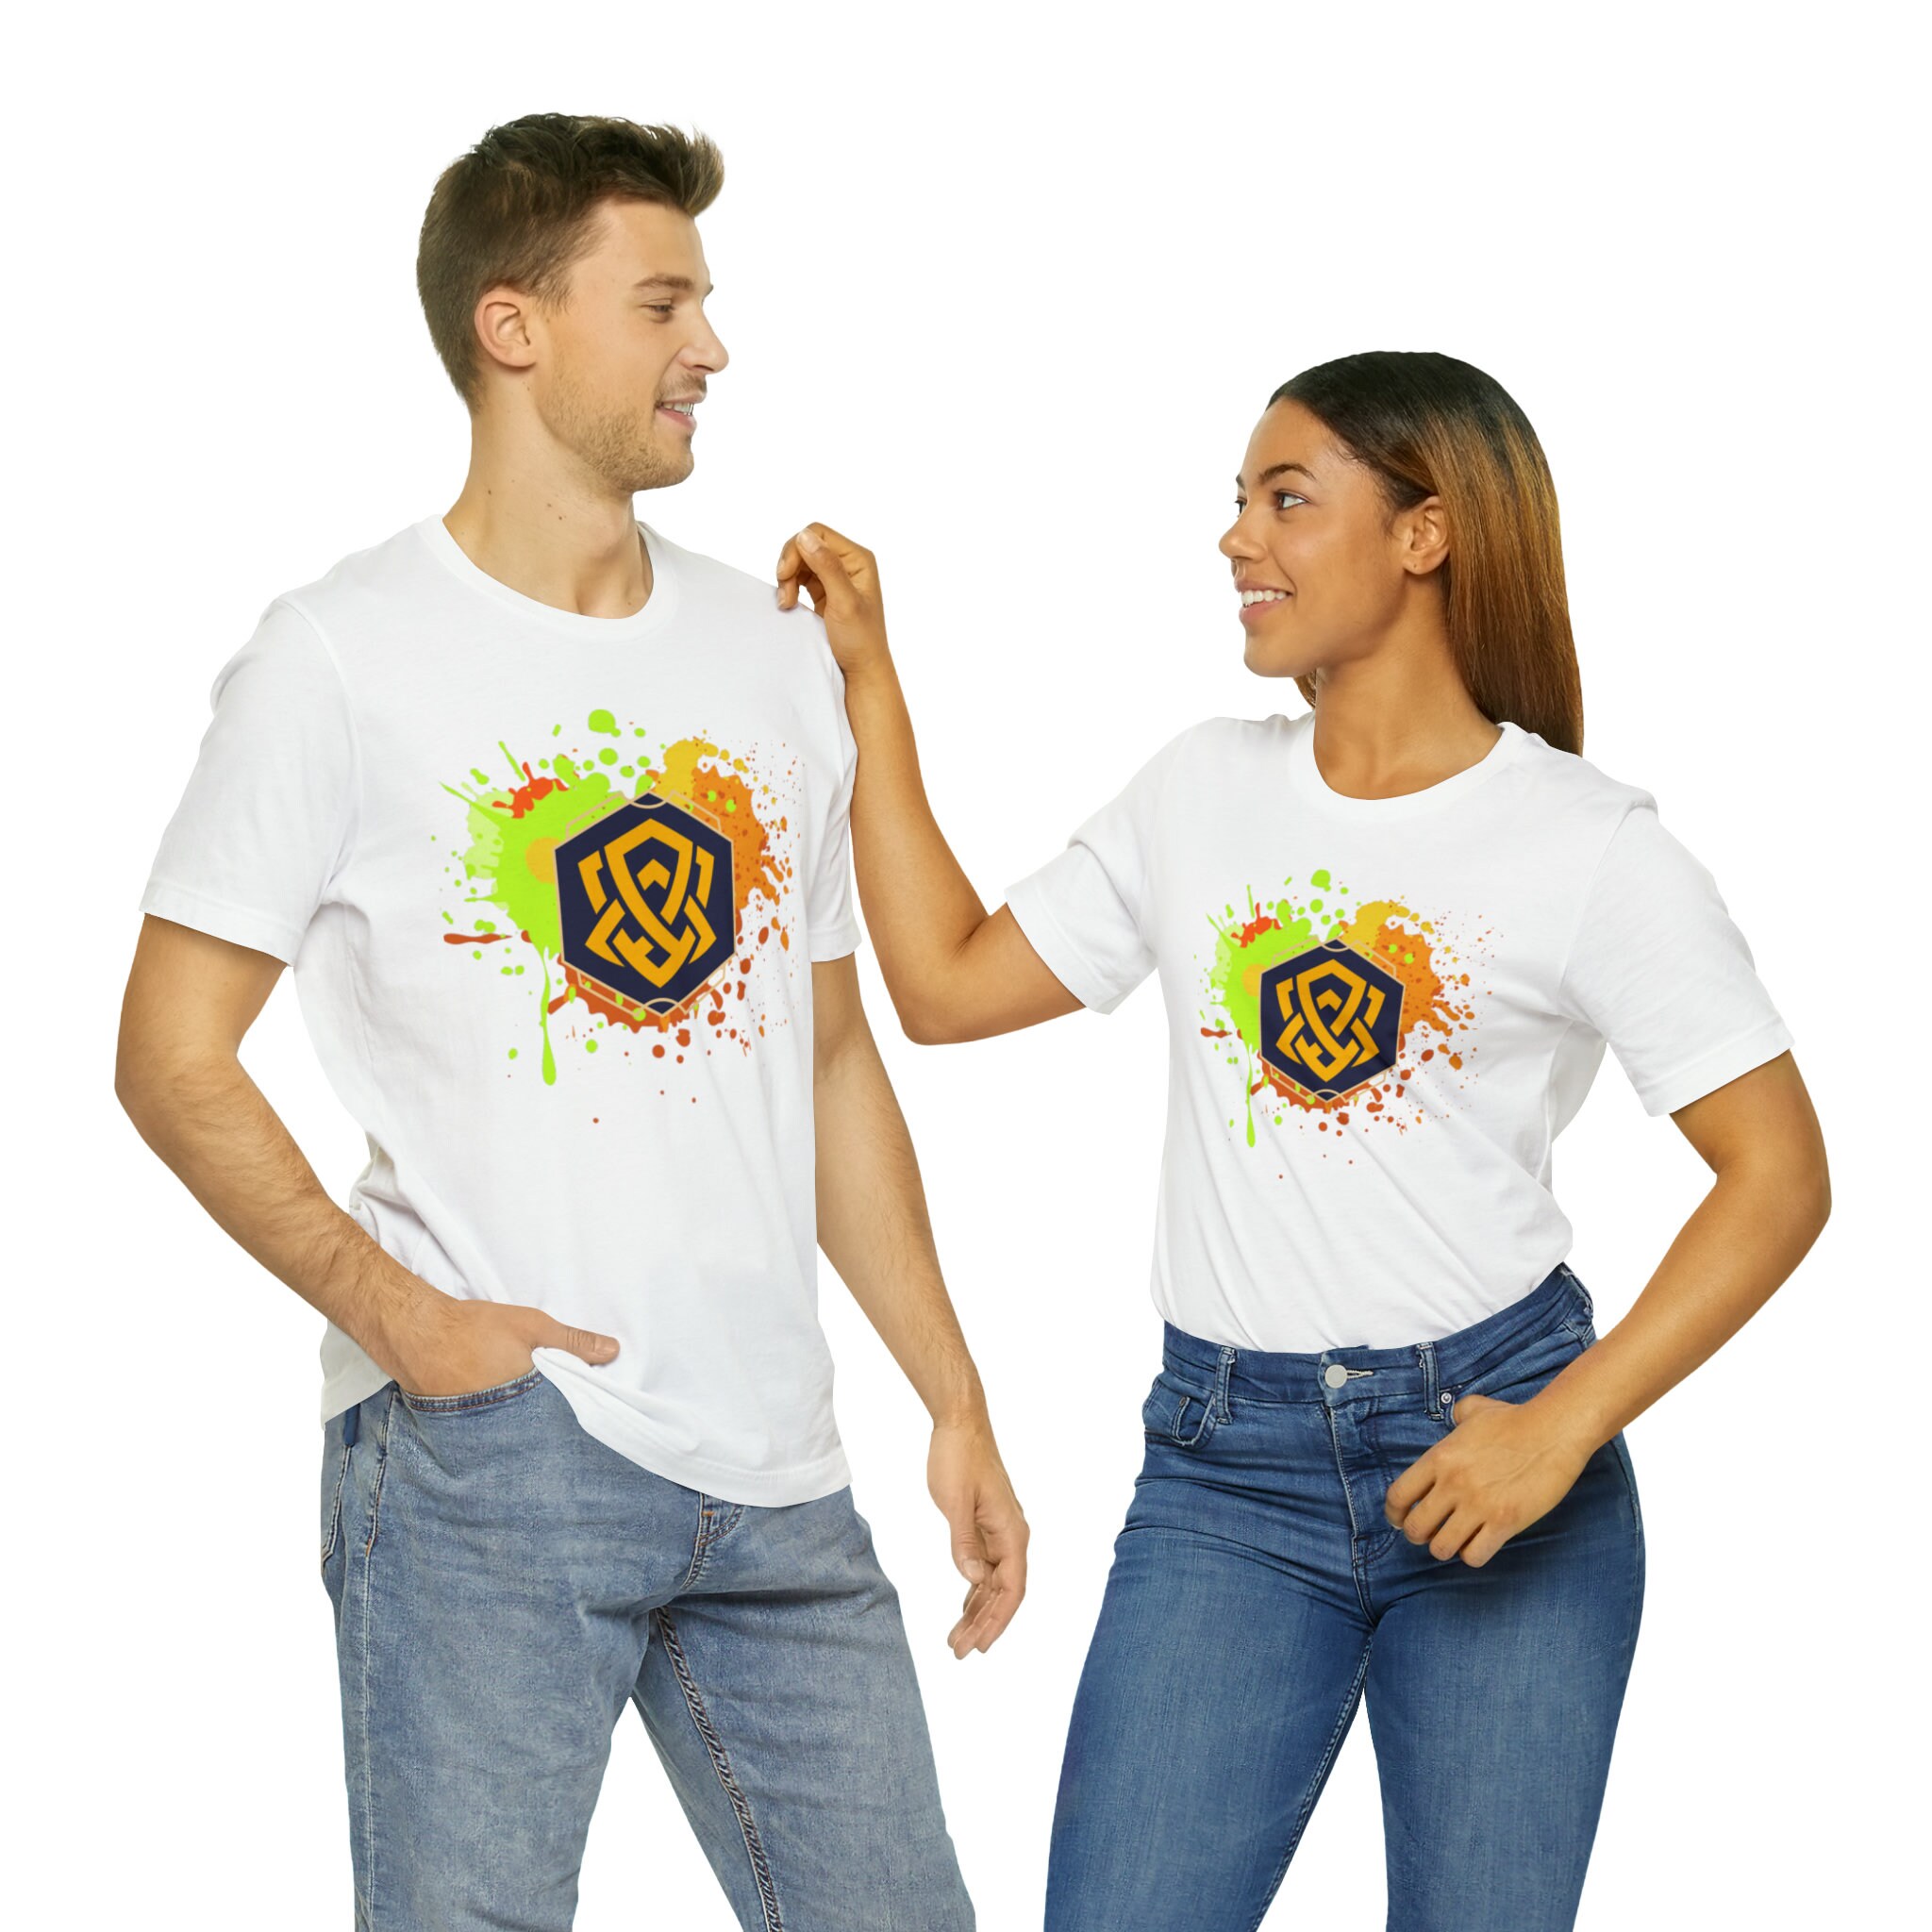 Amber Ink Lorcana Card Game Inspired Shirt the Perfect Gift for